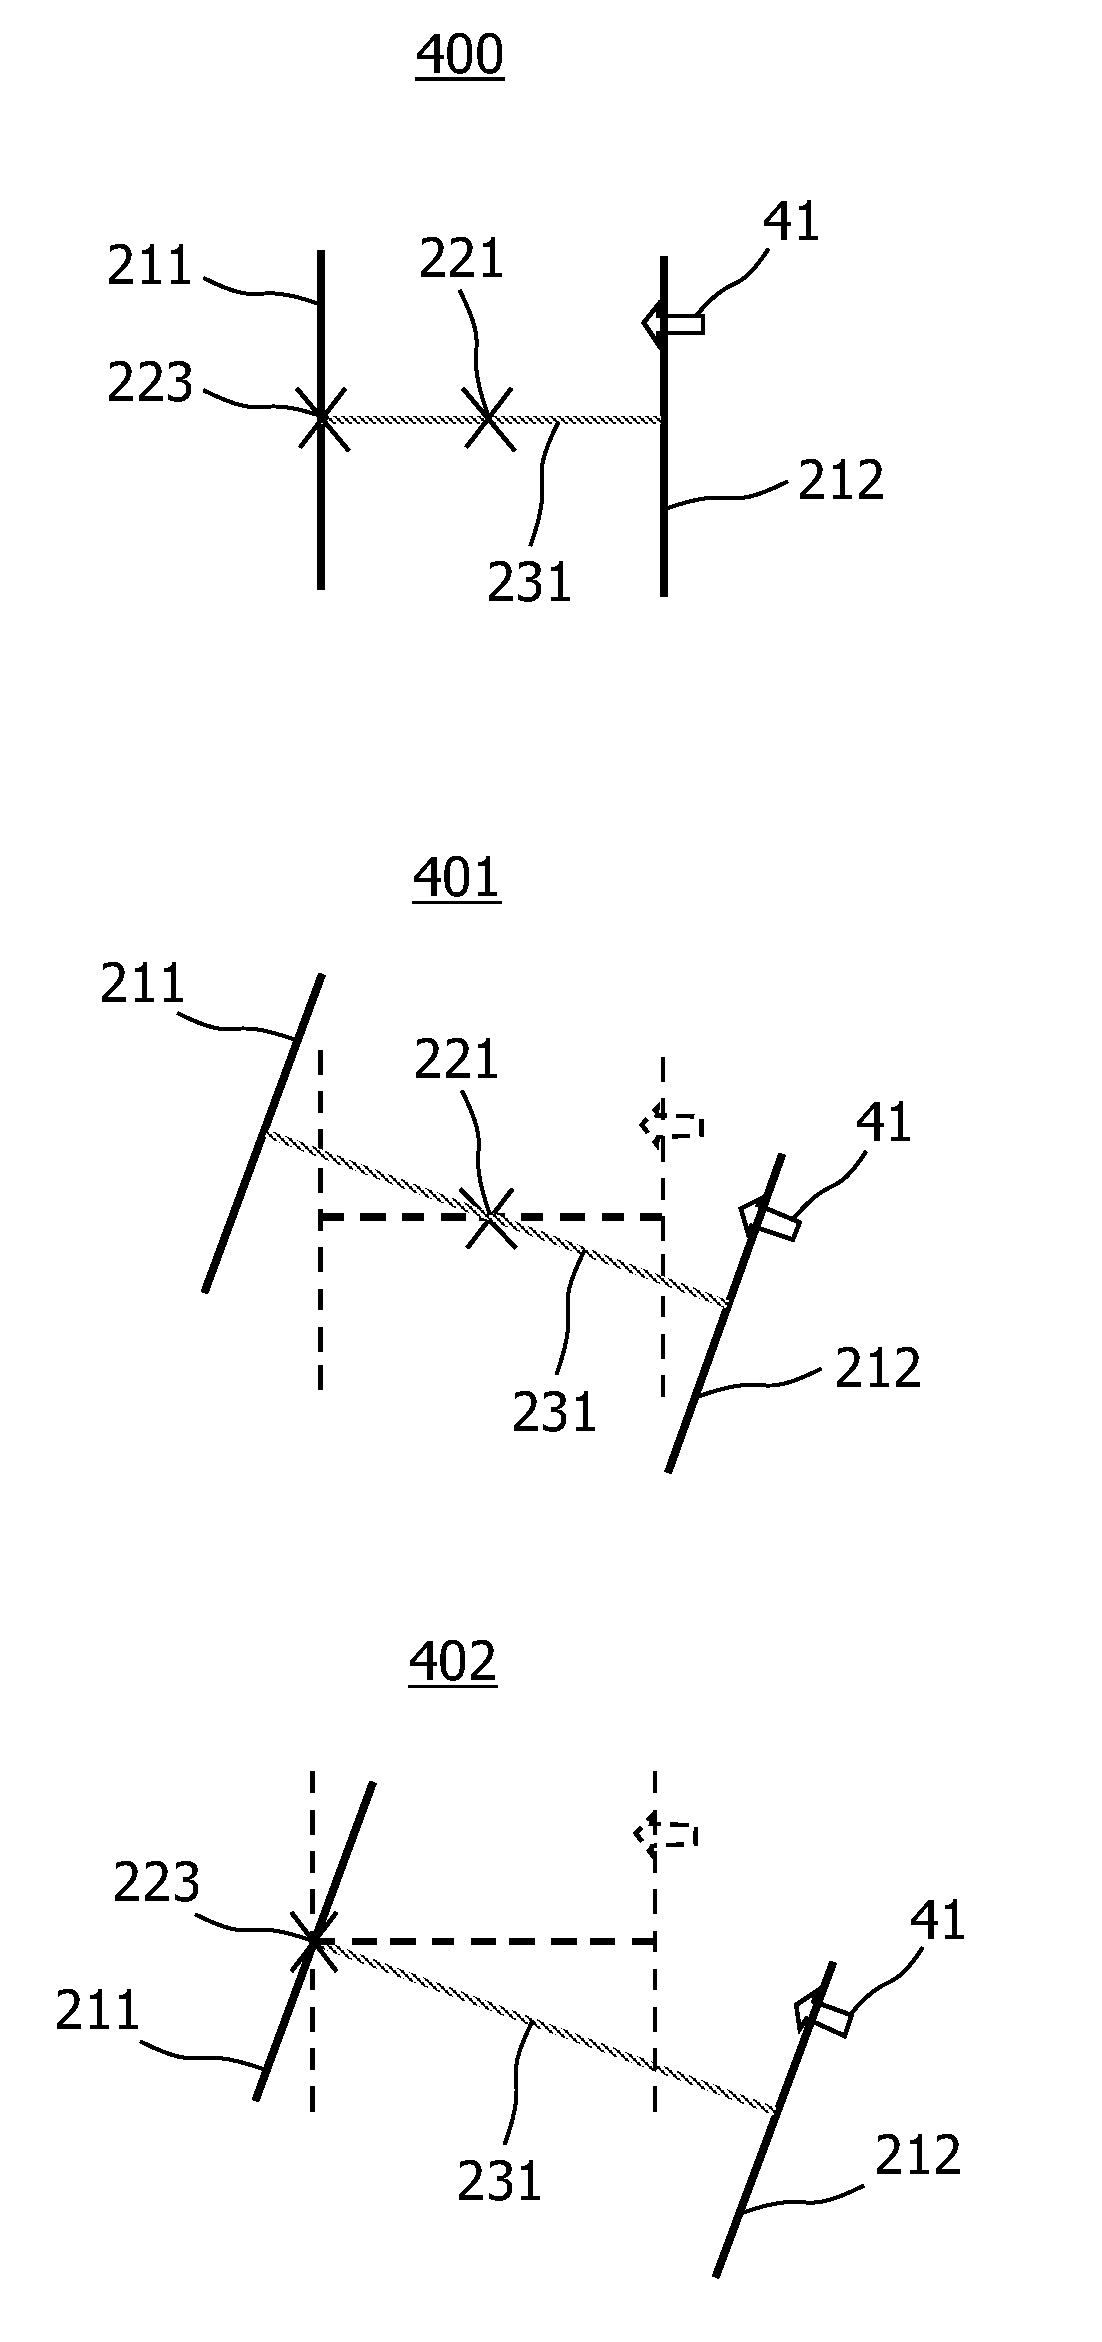 Caliper for measuring objects in an image